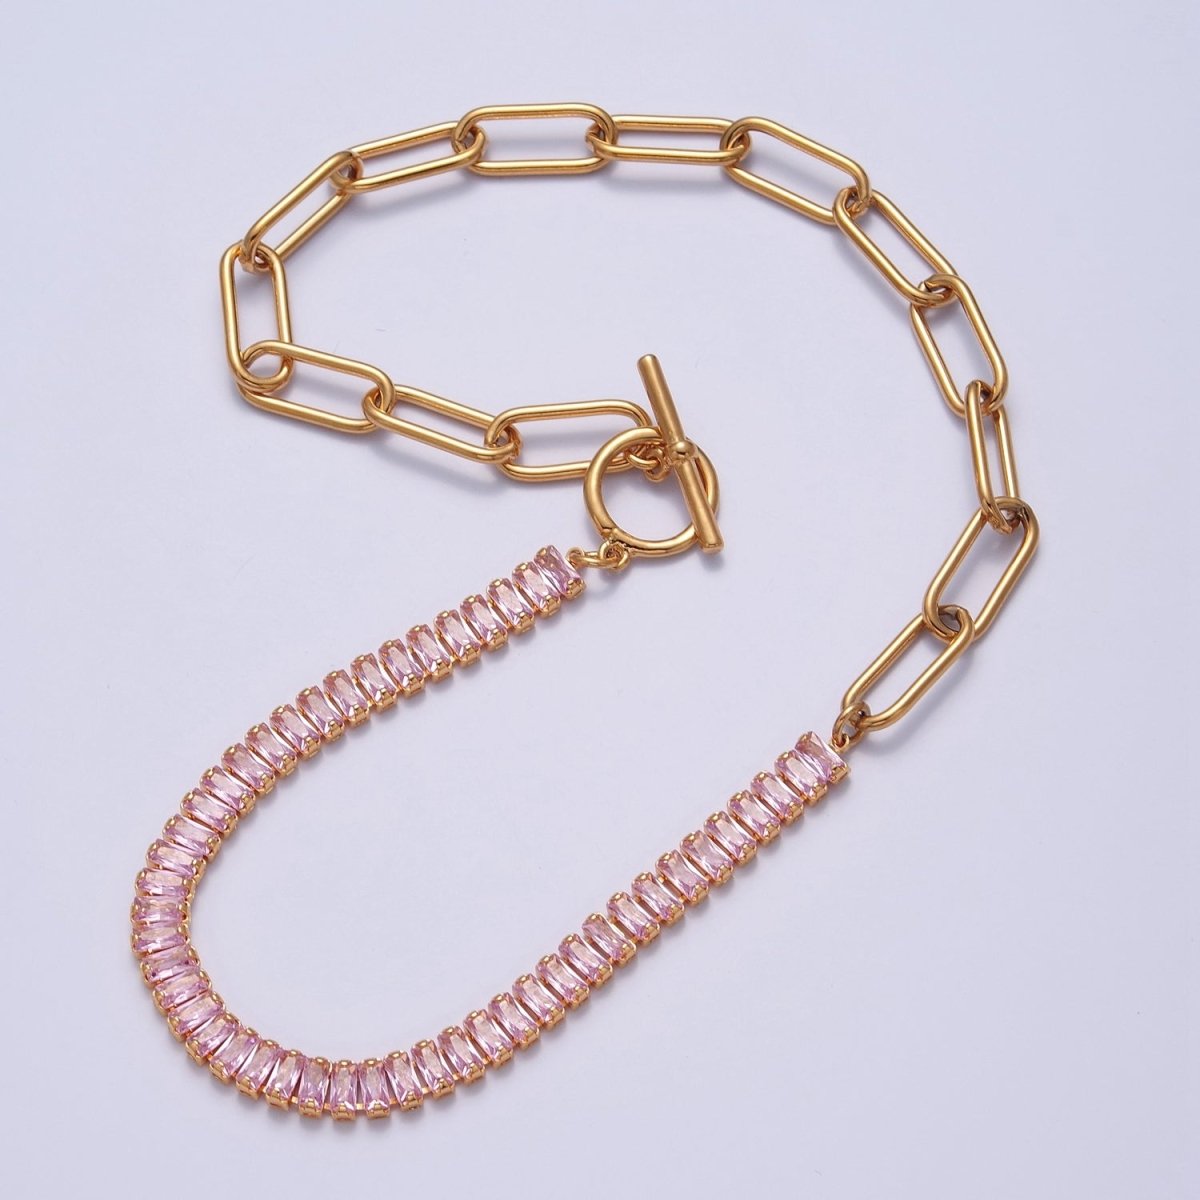 Fusion Necklace Half Baguette Tennis Chain, Half Paper Clip Chain, Statement 24K Gold Filled Necklace with Toggle | WA-945 WA-946 WA-949 WA-950 Clearance Pricing - DLUXCA